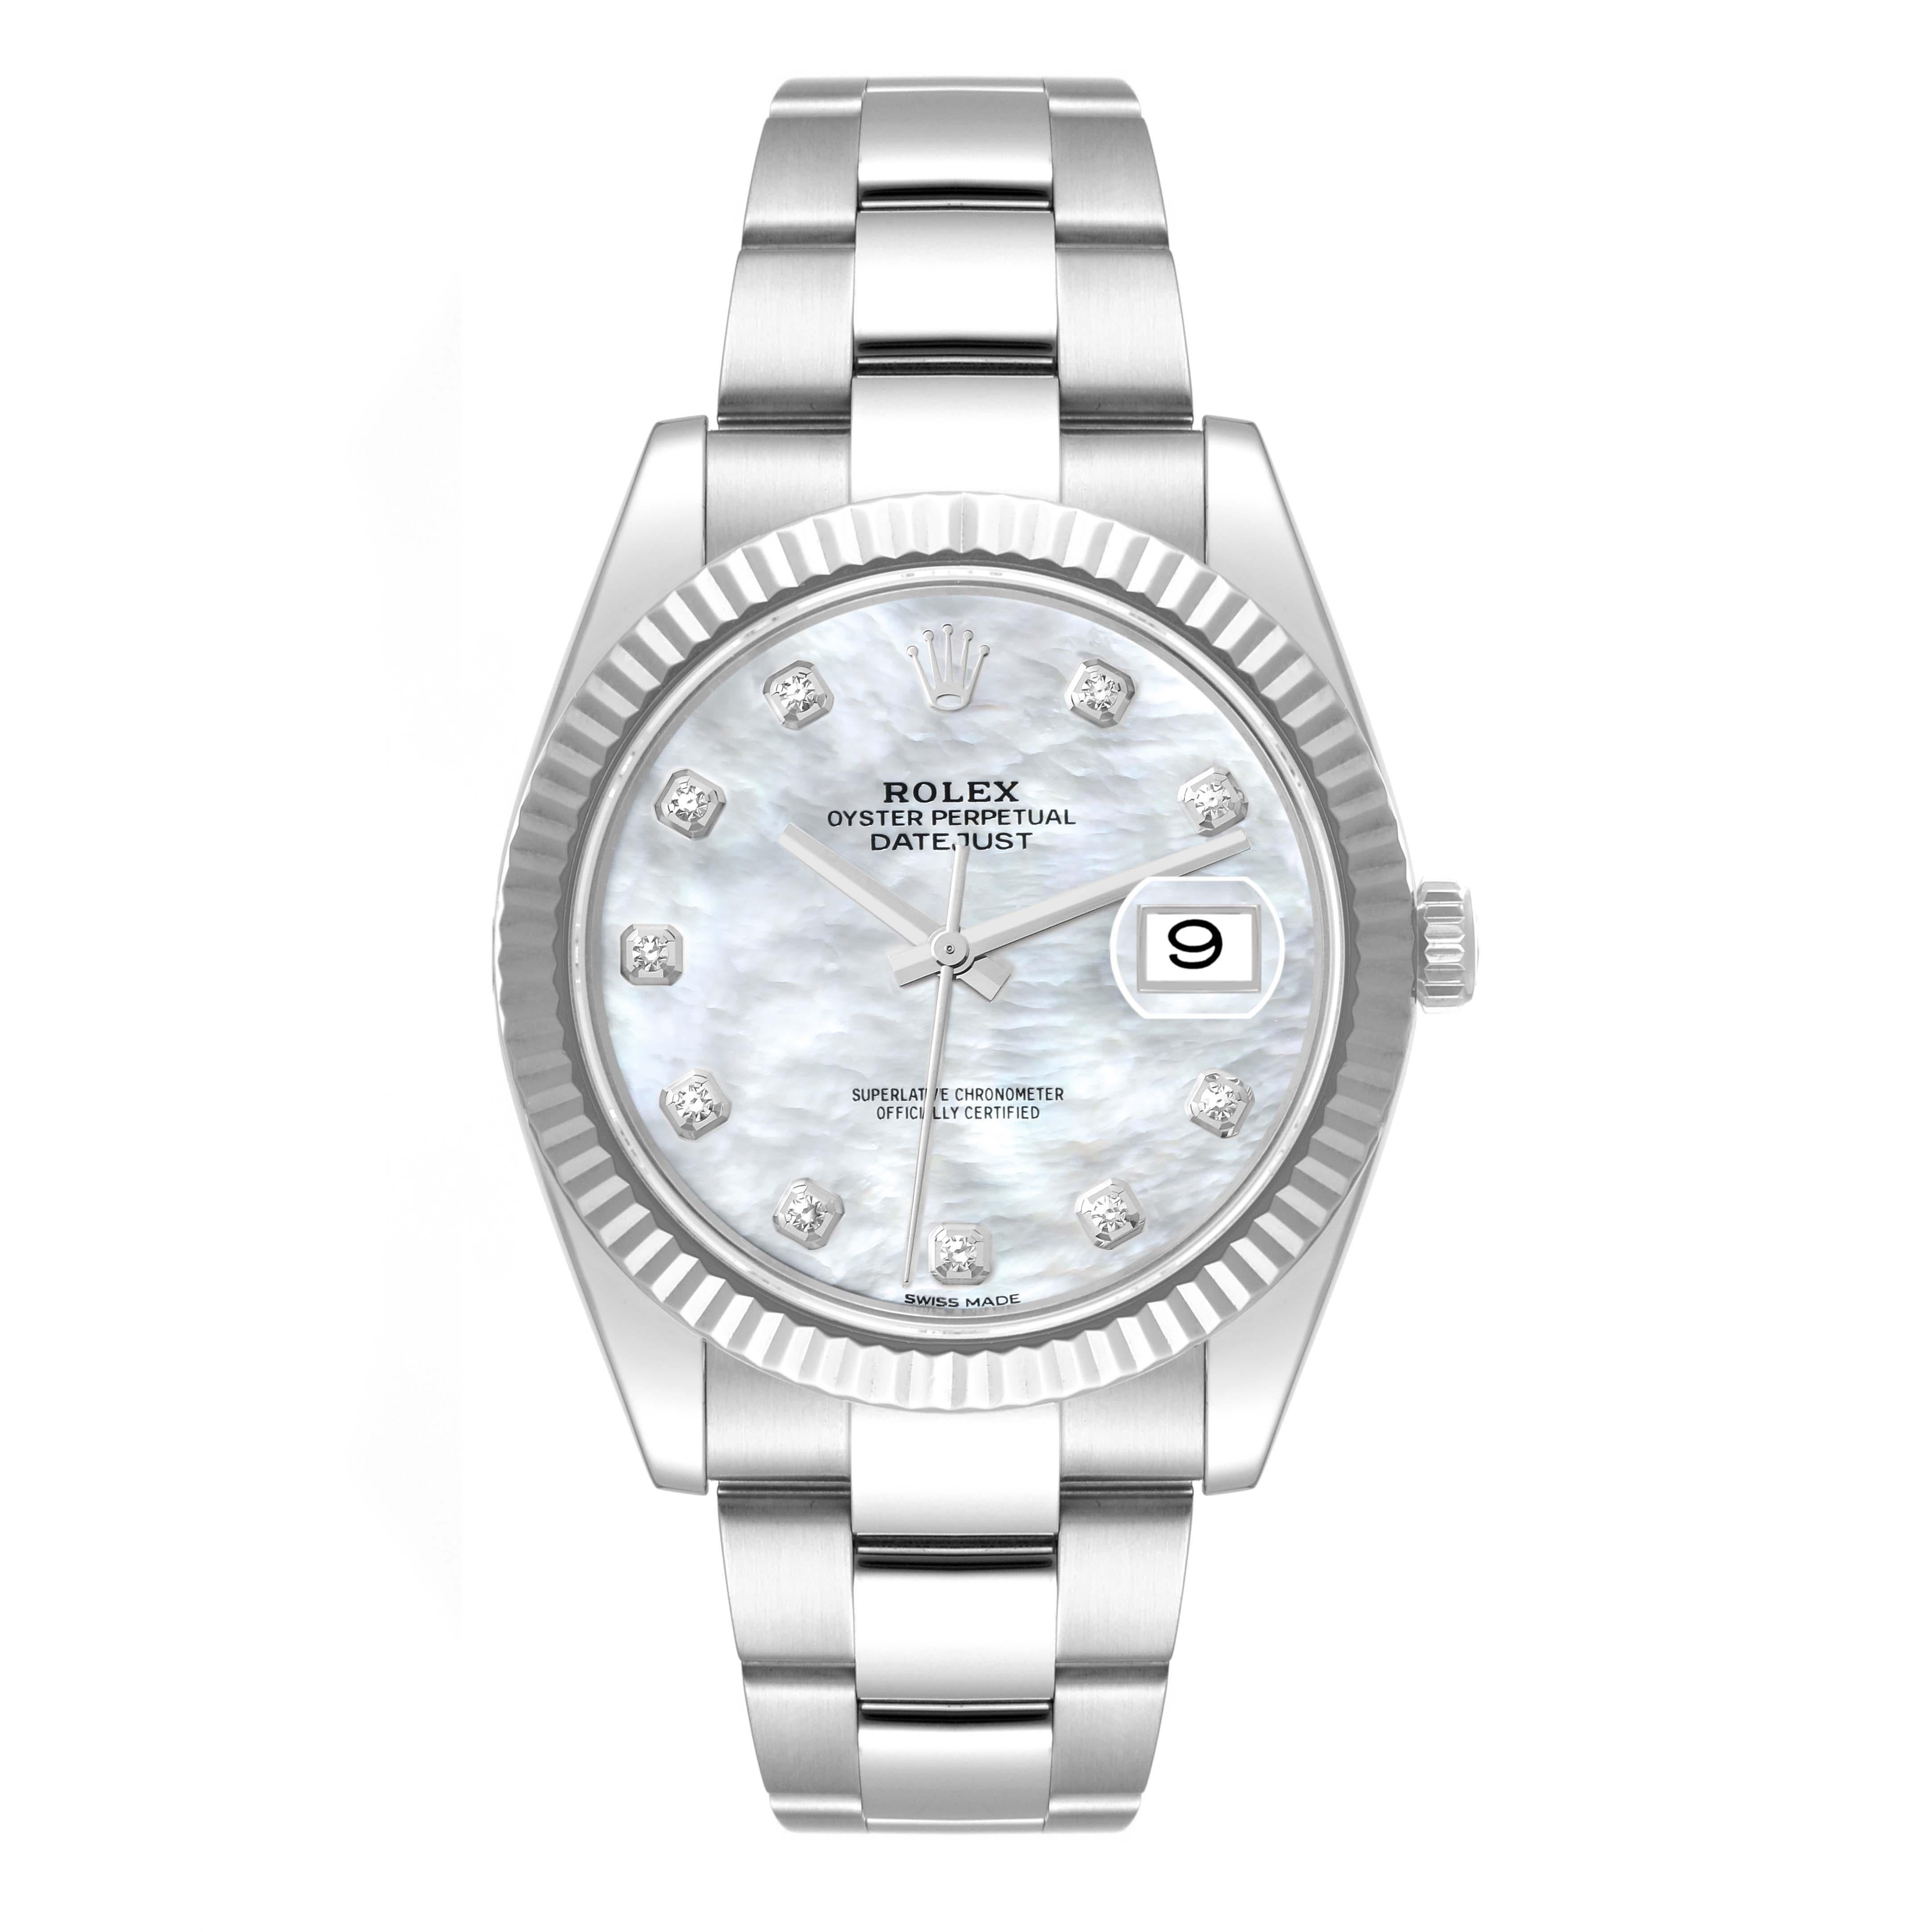 Rolex Datejust 41 Steel White Gold Mother Of Pearl Diamond Dial Mens Watch 126334 Box Card. Officially certified chronometer automatic self-winding movement. Stainless steel case 41 mm in diameter. Rolex logo on the crown. 18K white gold fluted